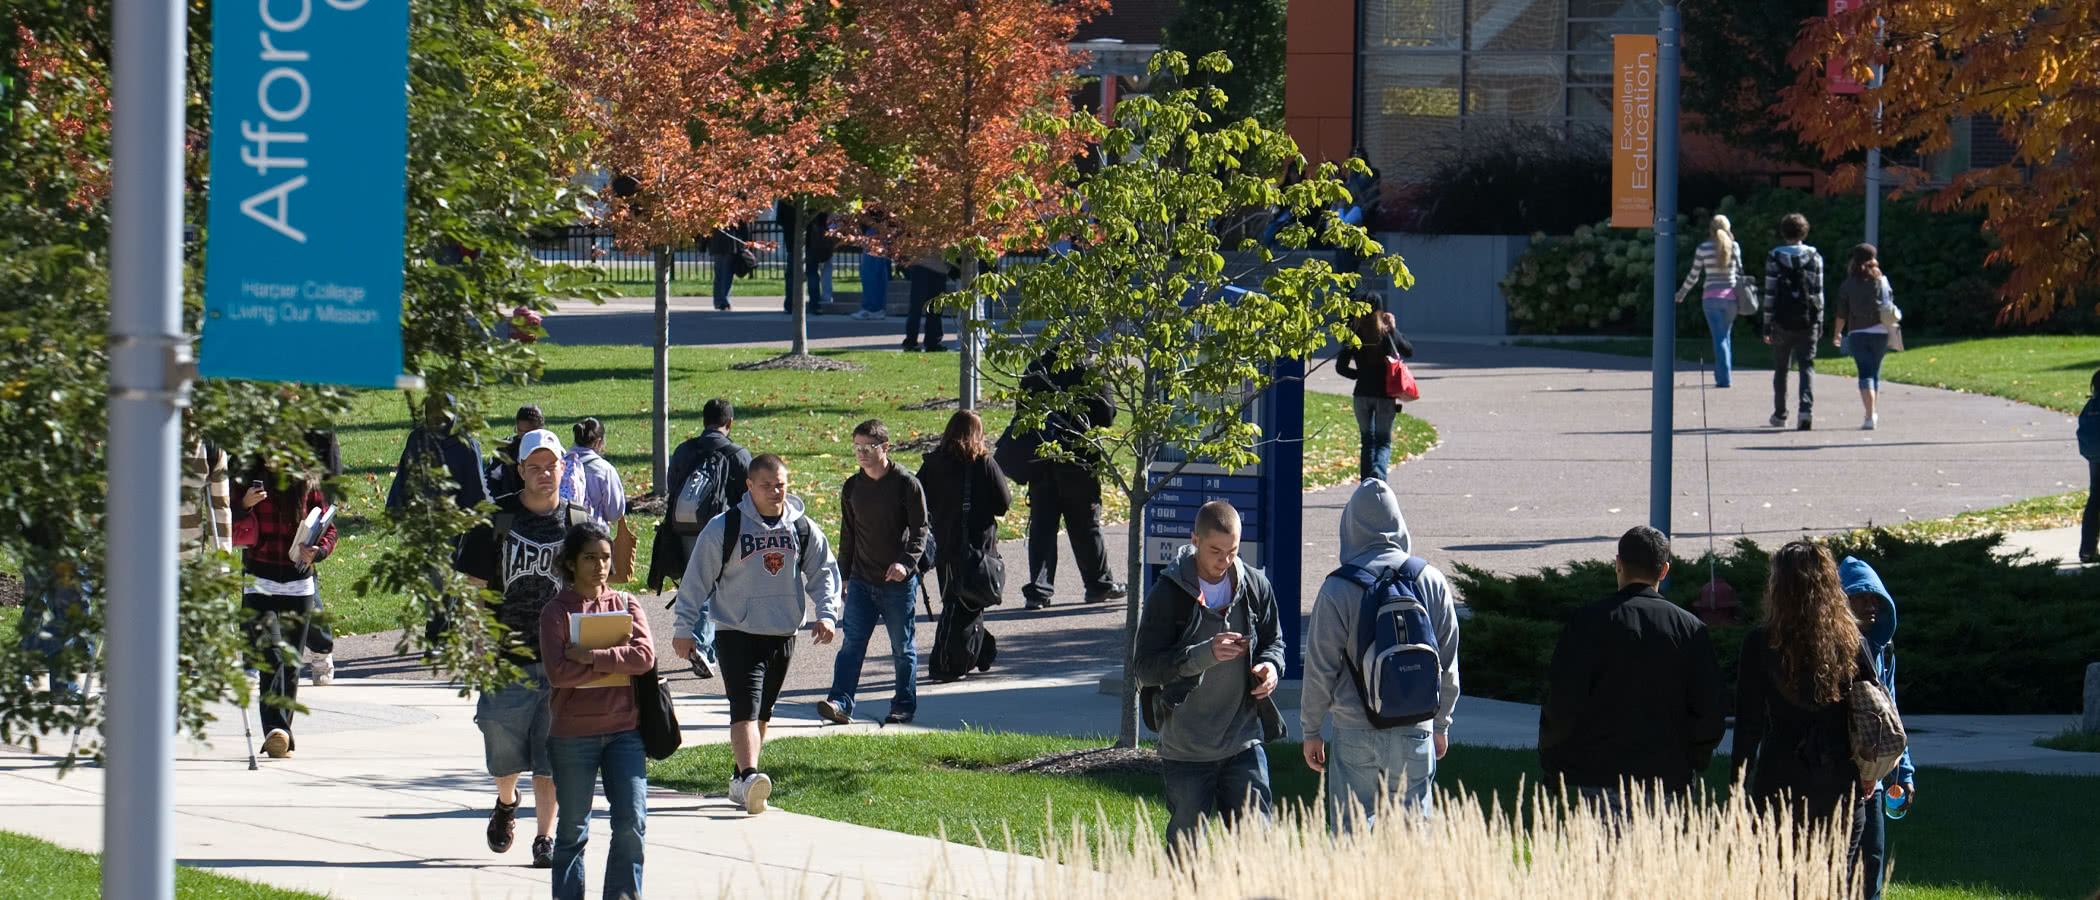 Students walking in the quad